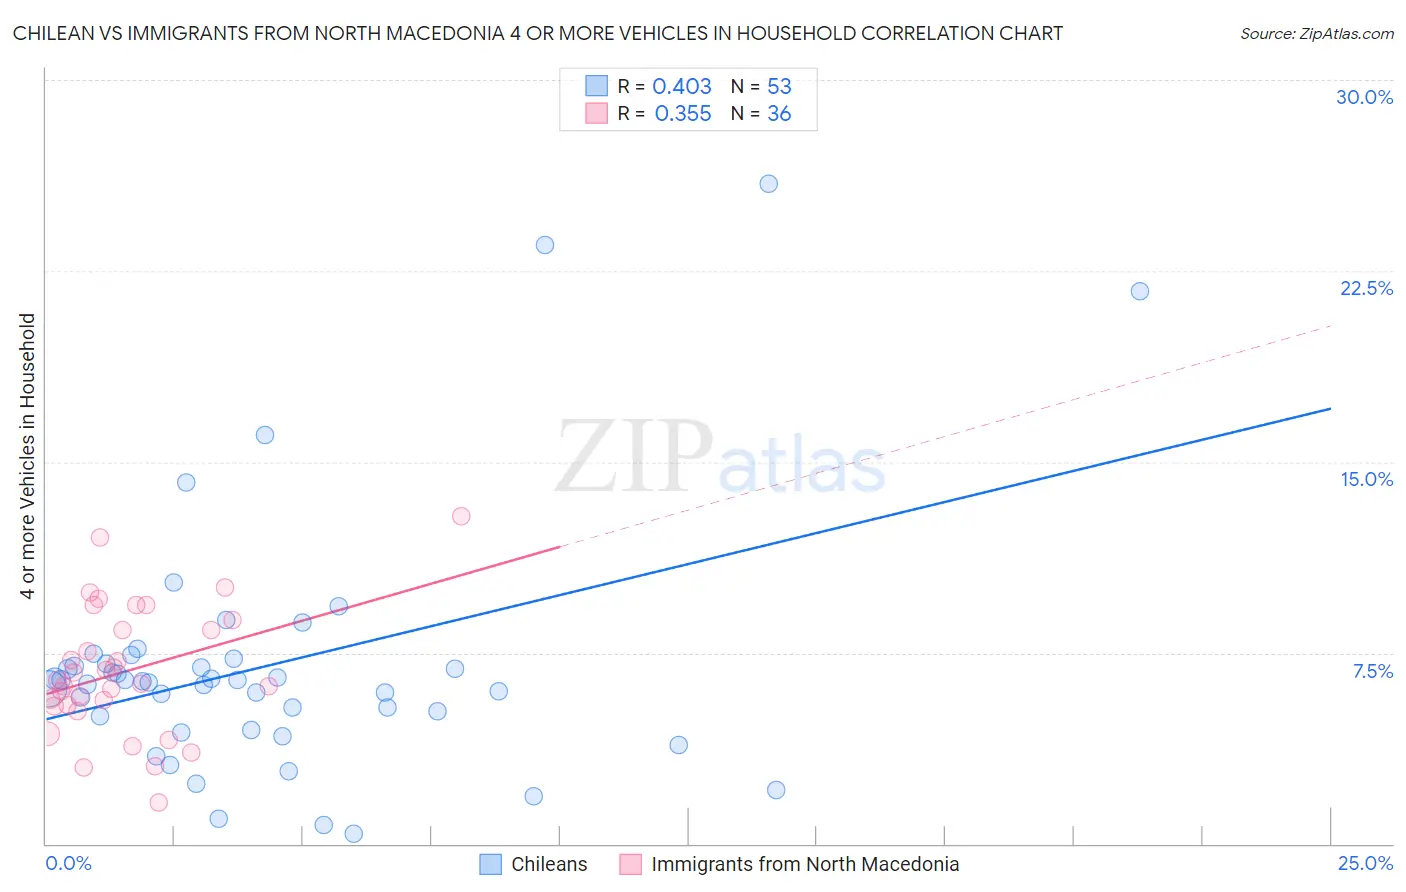 Chilean vs Immigrants from North Macedonia 4 or more Vehicles in Household